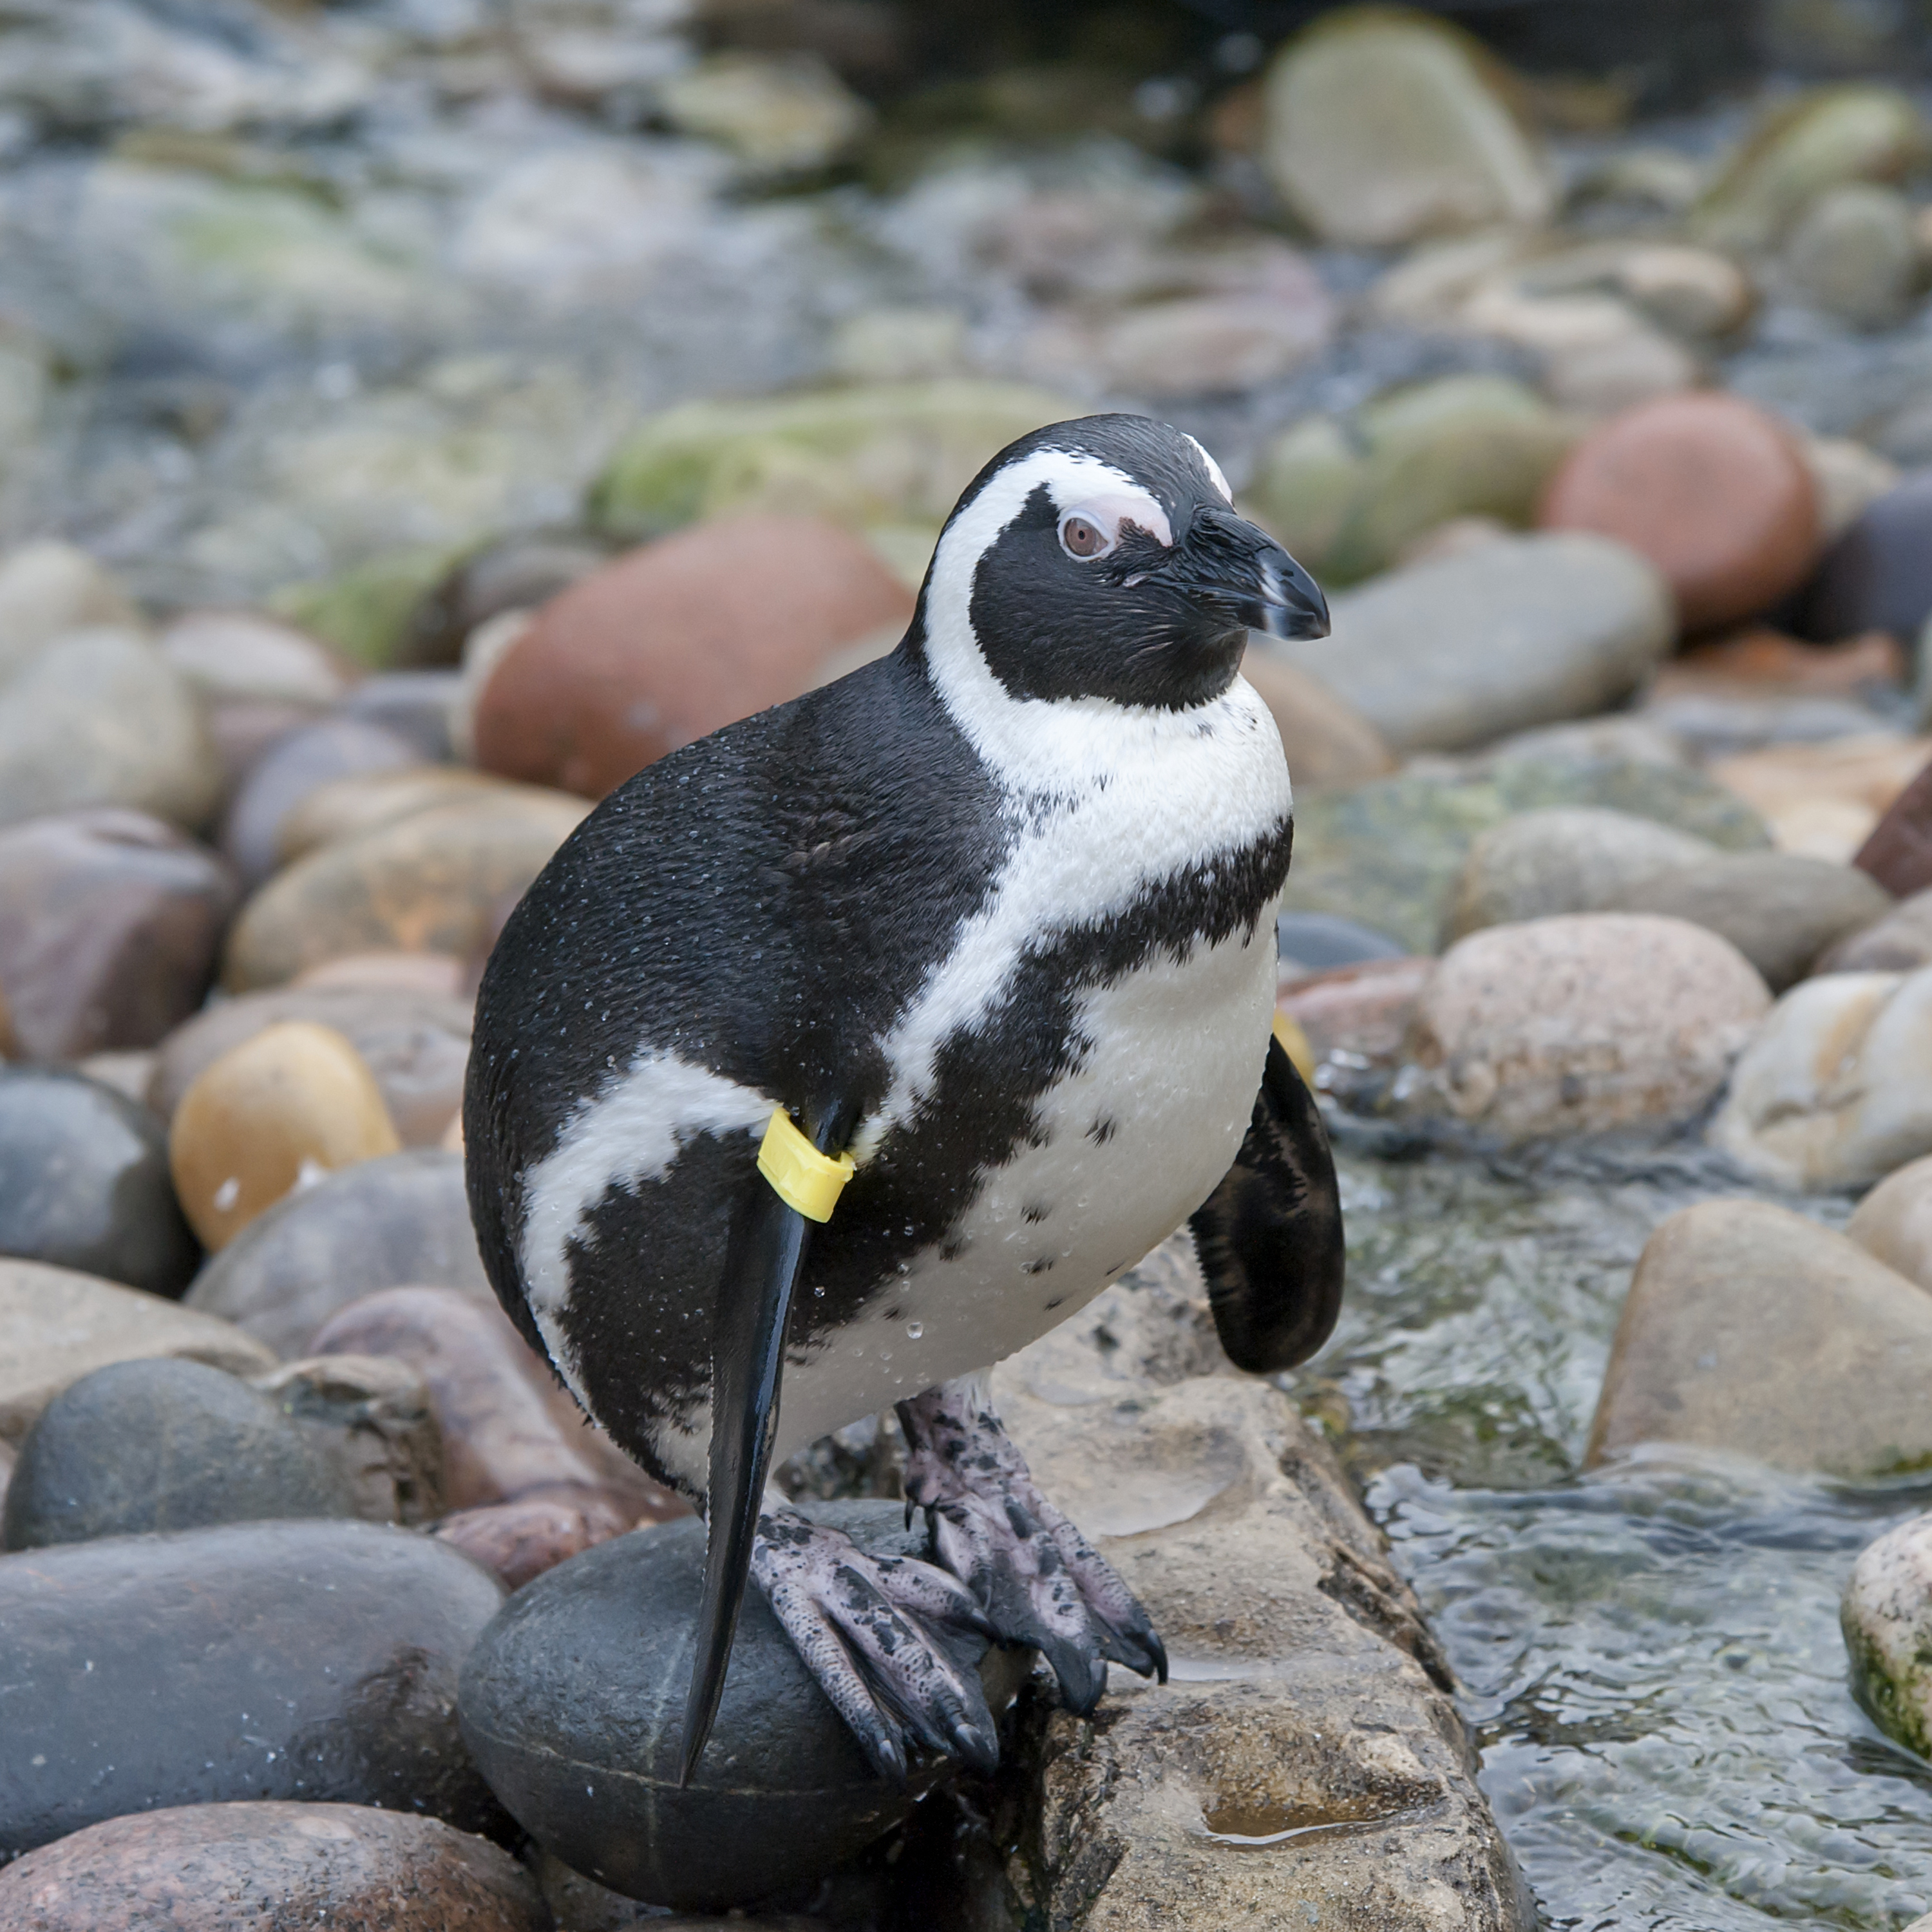 Based on nearly two decades of data collected by Earthwatch scientists and volunteers, South Africa in 2019 established a new 580 km2 Marine Protected Area around Robben Island to safeguard seabirds, including the endangered African penguin. 